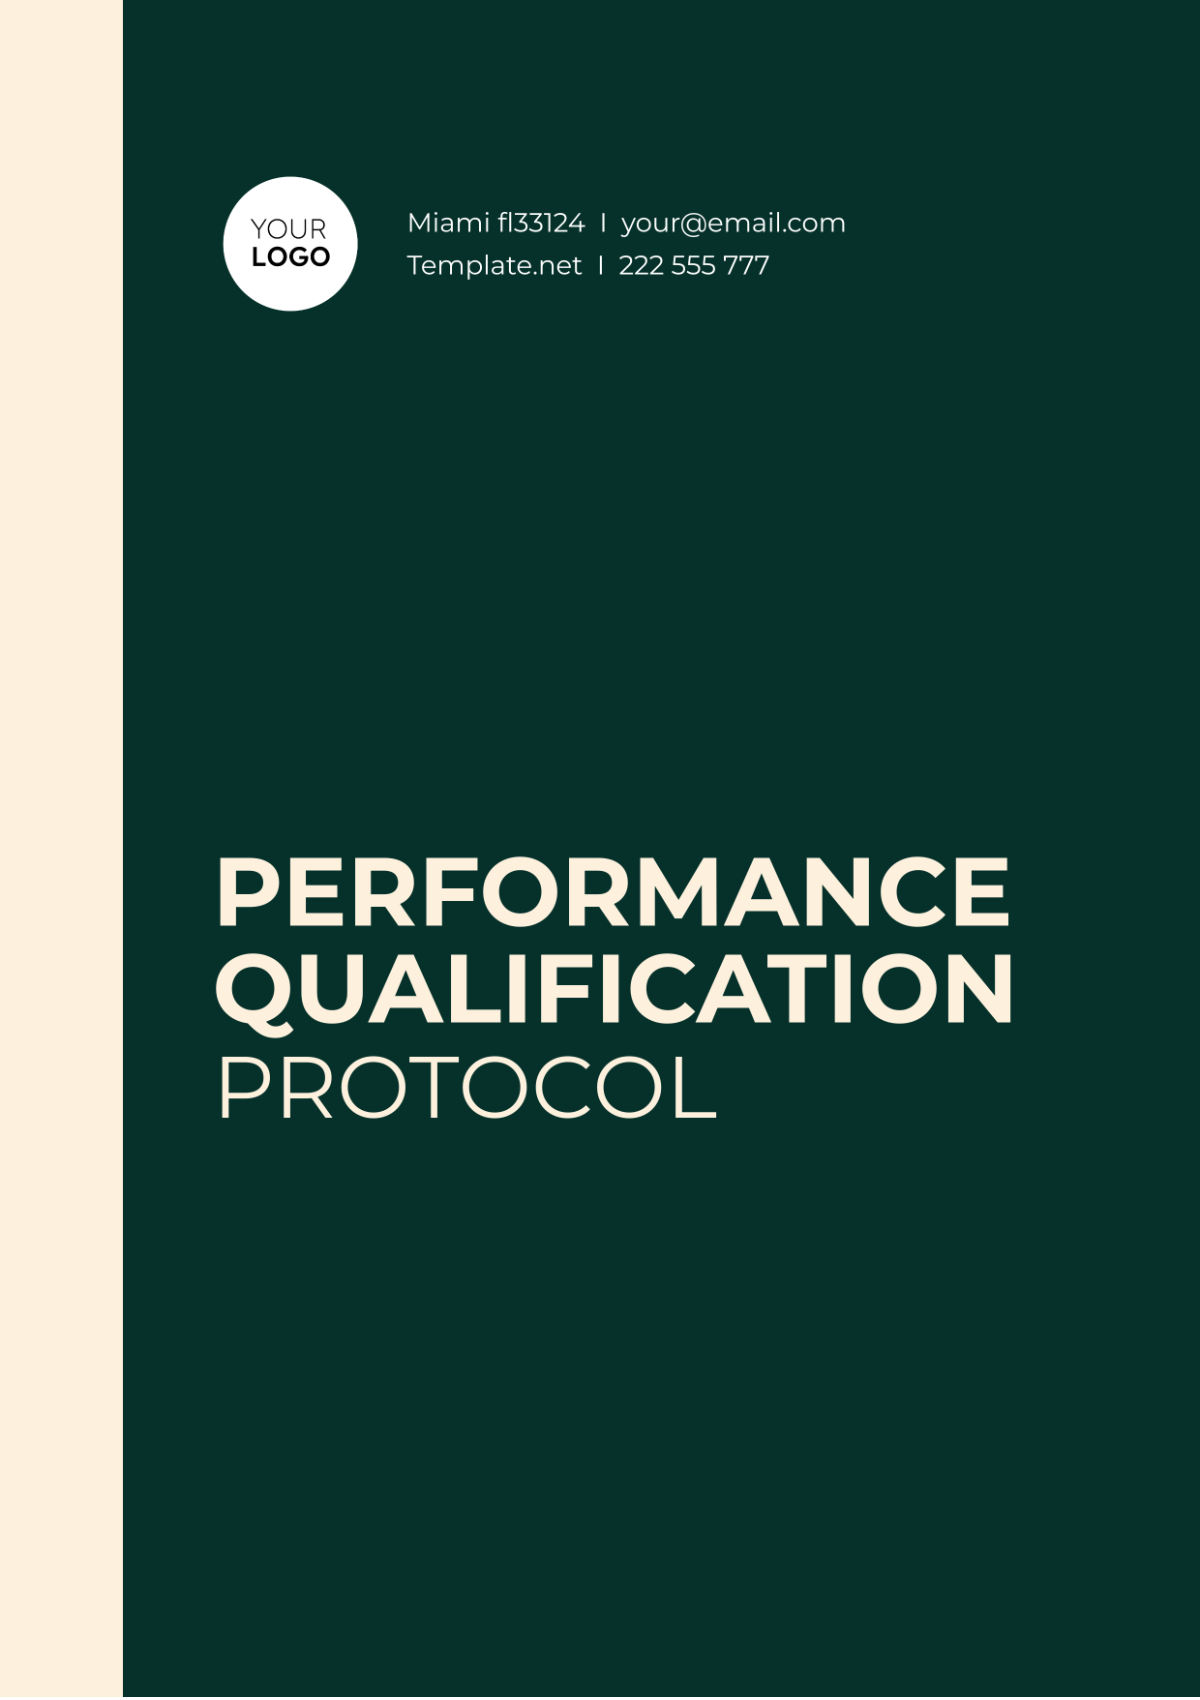 Free Performance Qualification Protocol Template